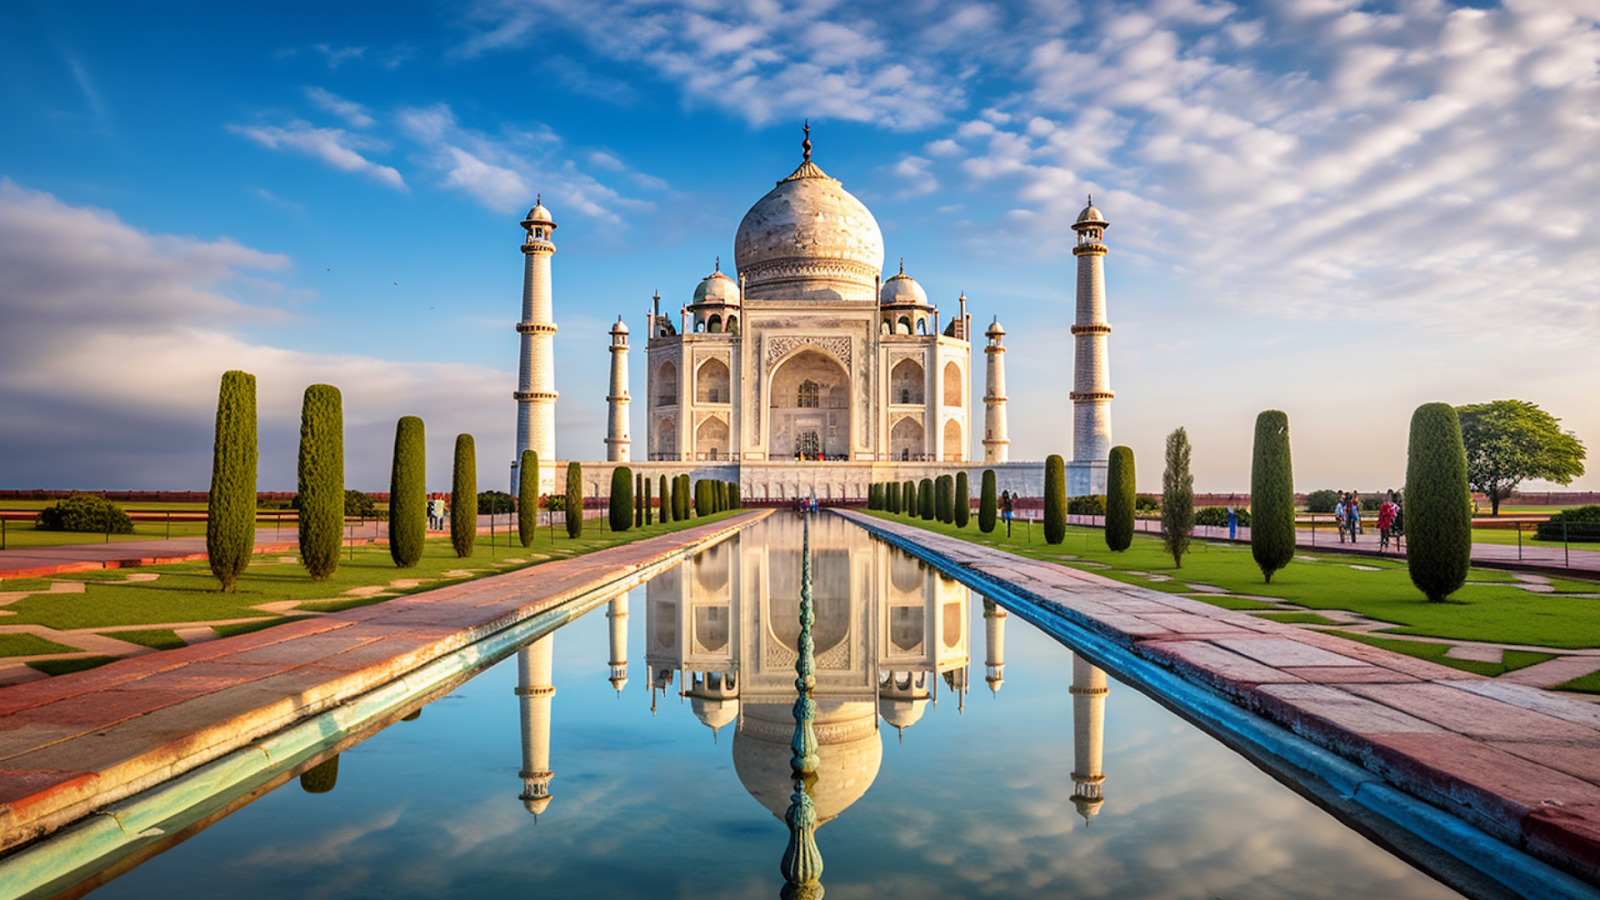 The Taj Mahal in Agra, India, reflected in the water at sunrise, a timeless symbol of love and one of the most iconic landmarks.